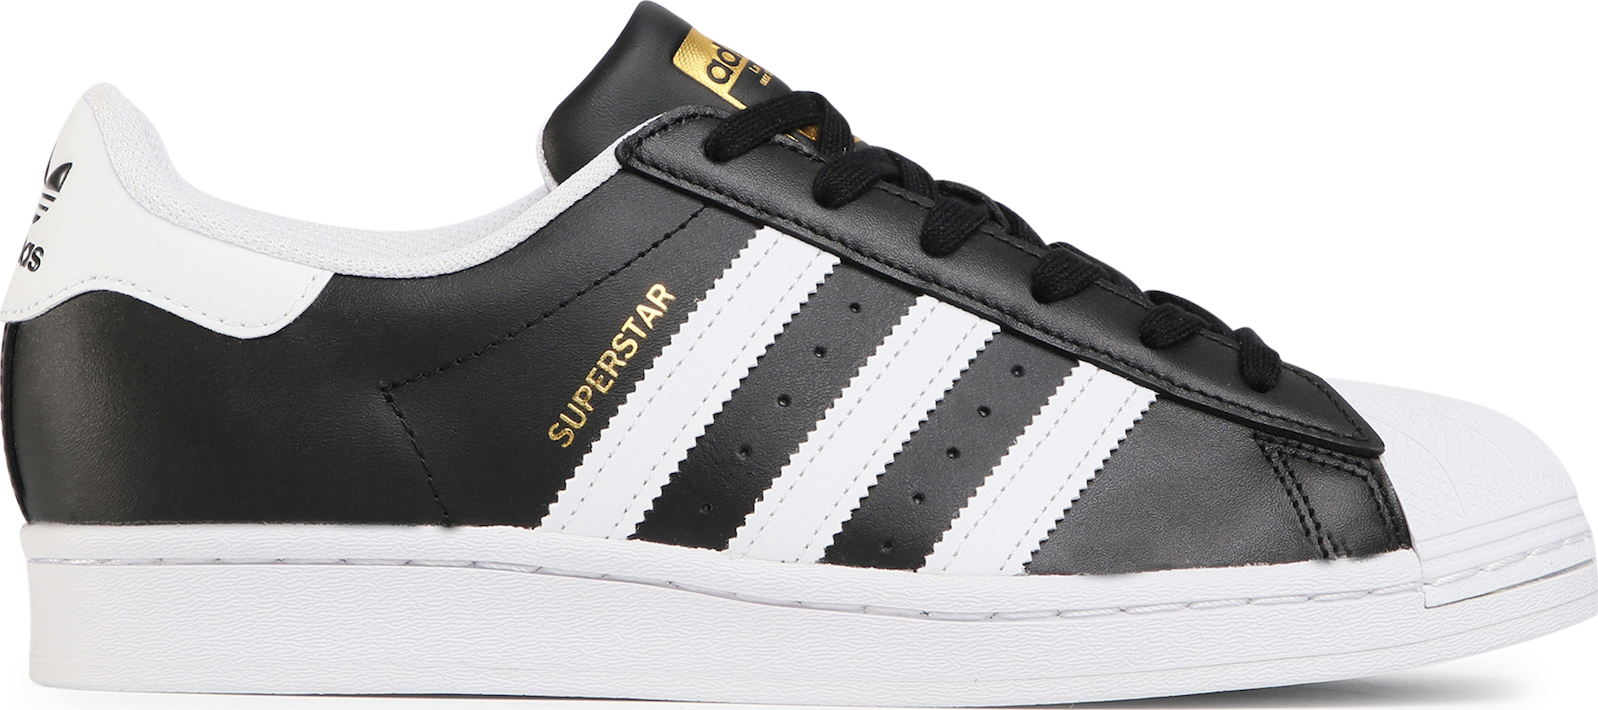 nicotine Miniature Rodeo Adidas Superstar Ανδρικά Sneakers Core Black / Cloud White / Gold Metallic  FX2331 | Skroutz.gr